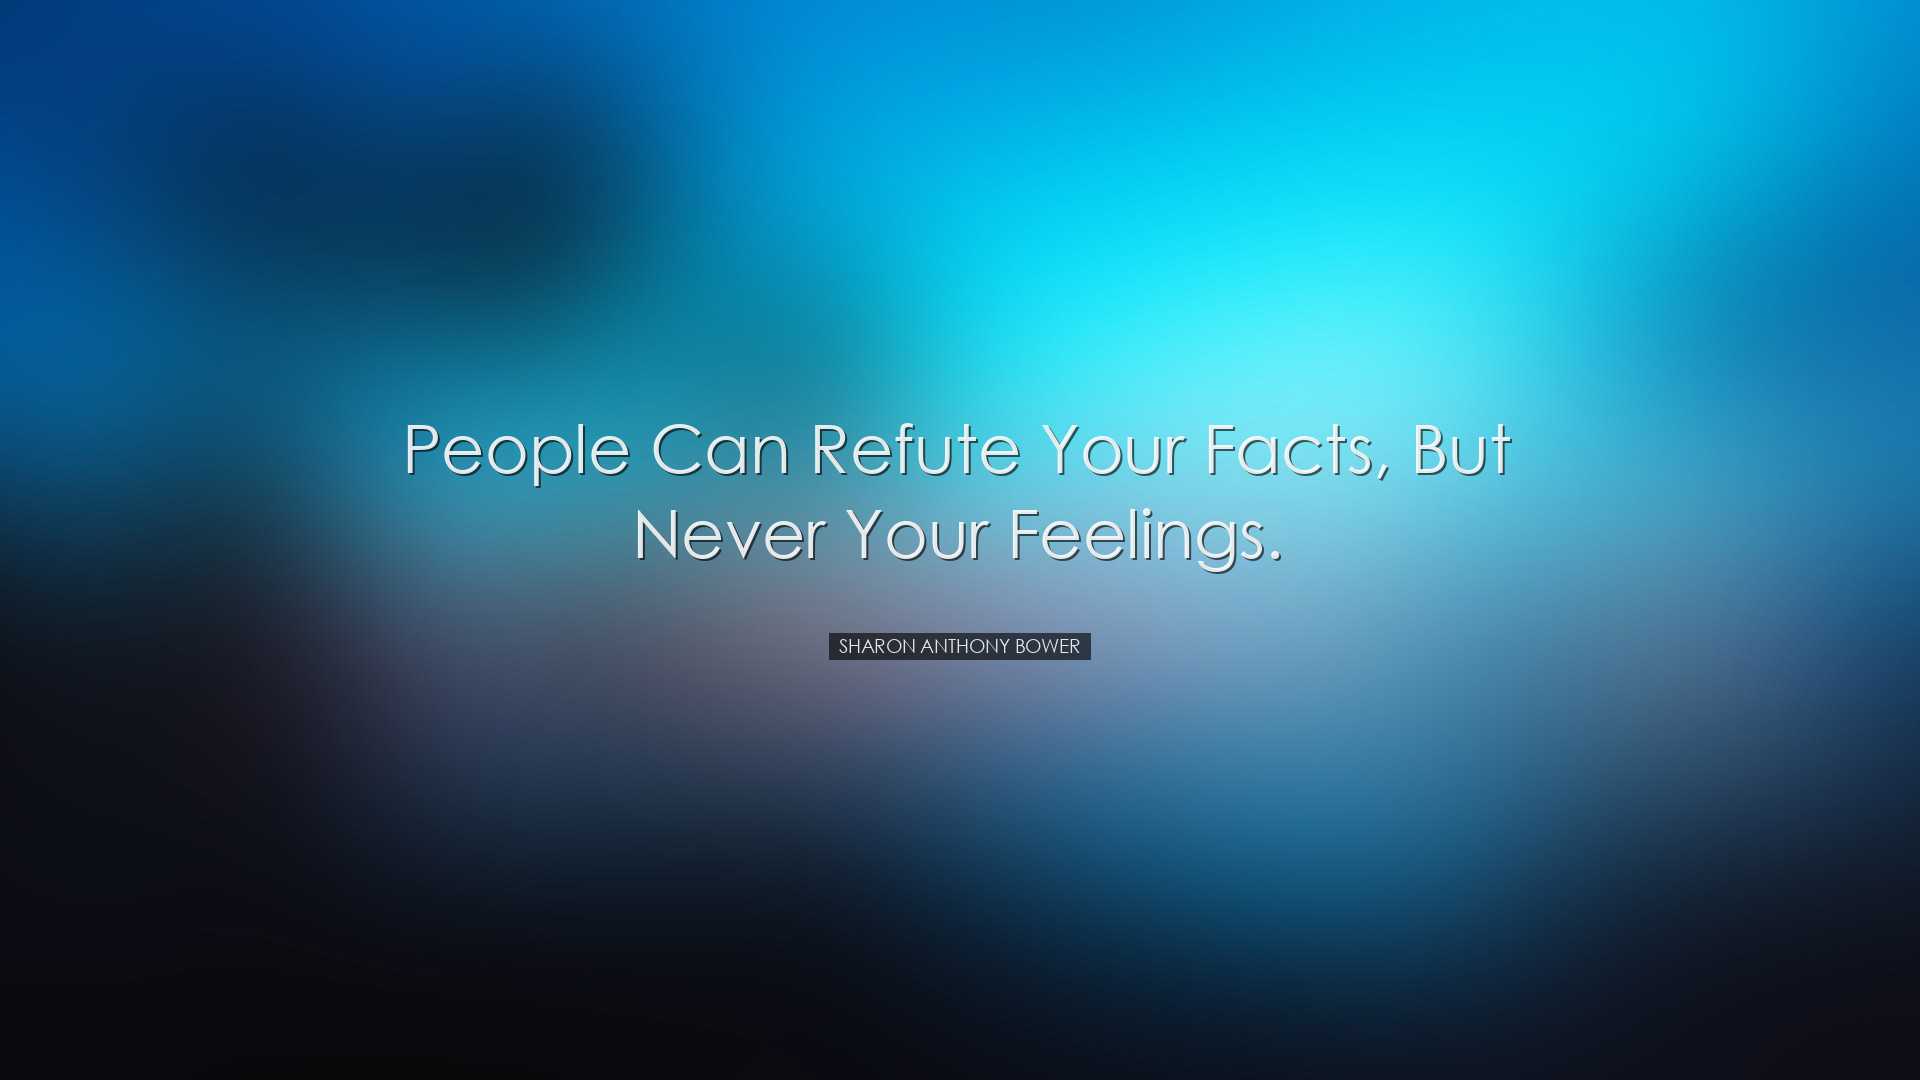 People can refute your facts, but never your feelings. - Sharon An